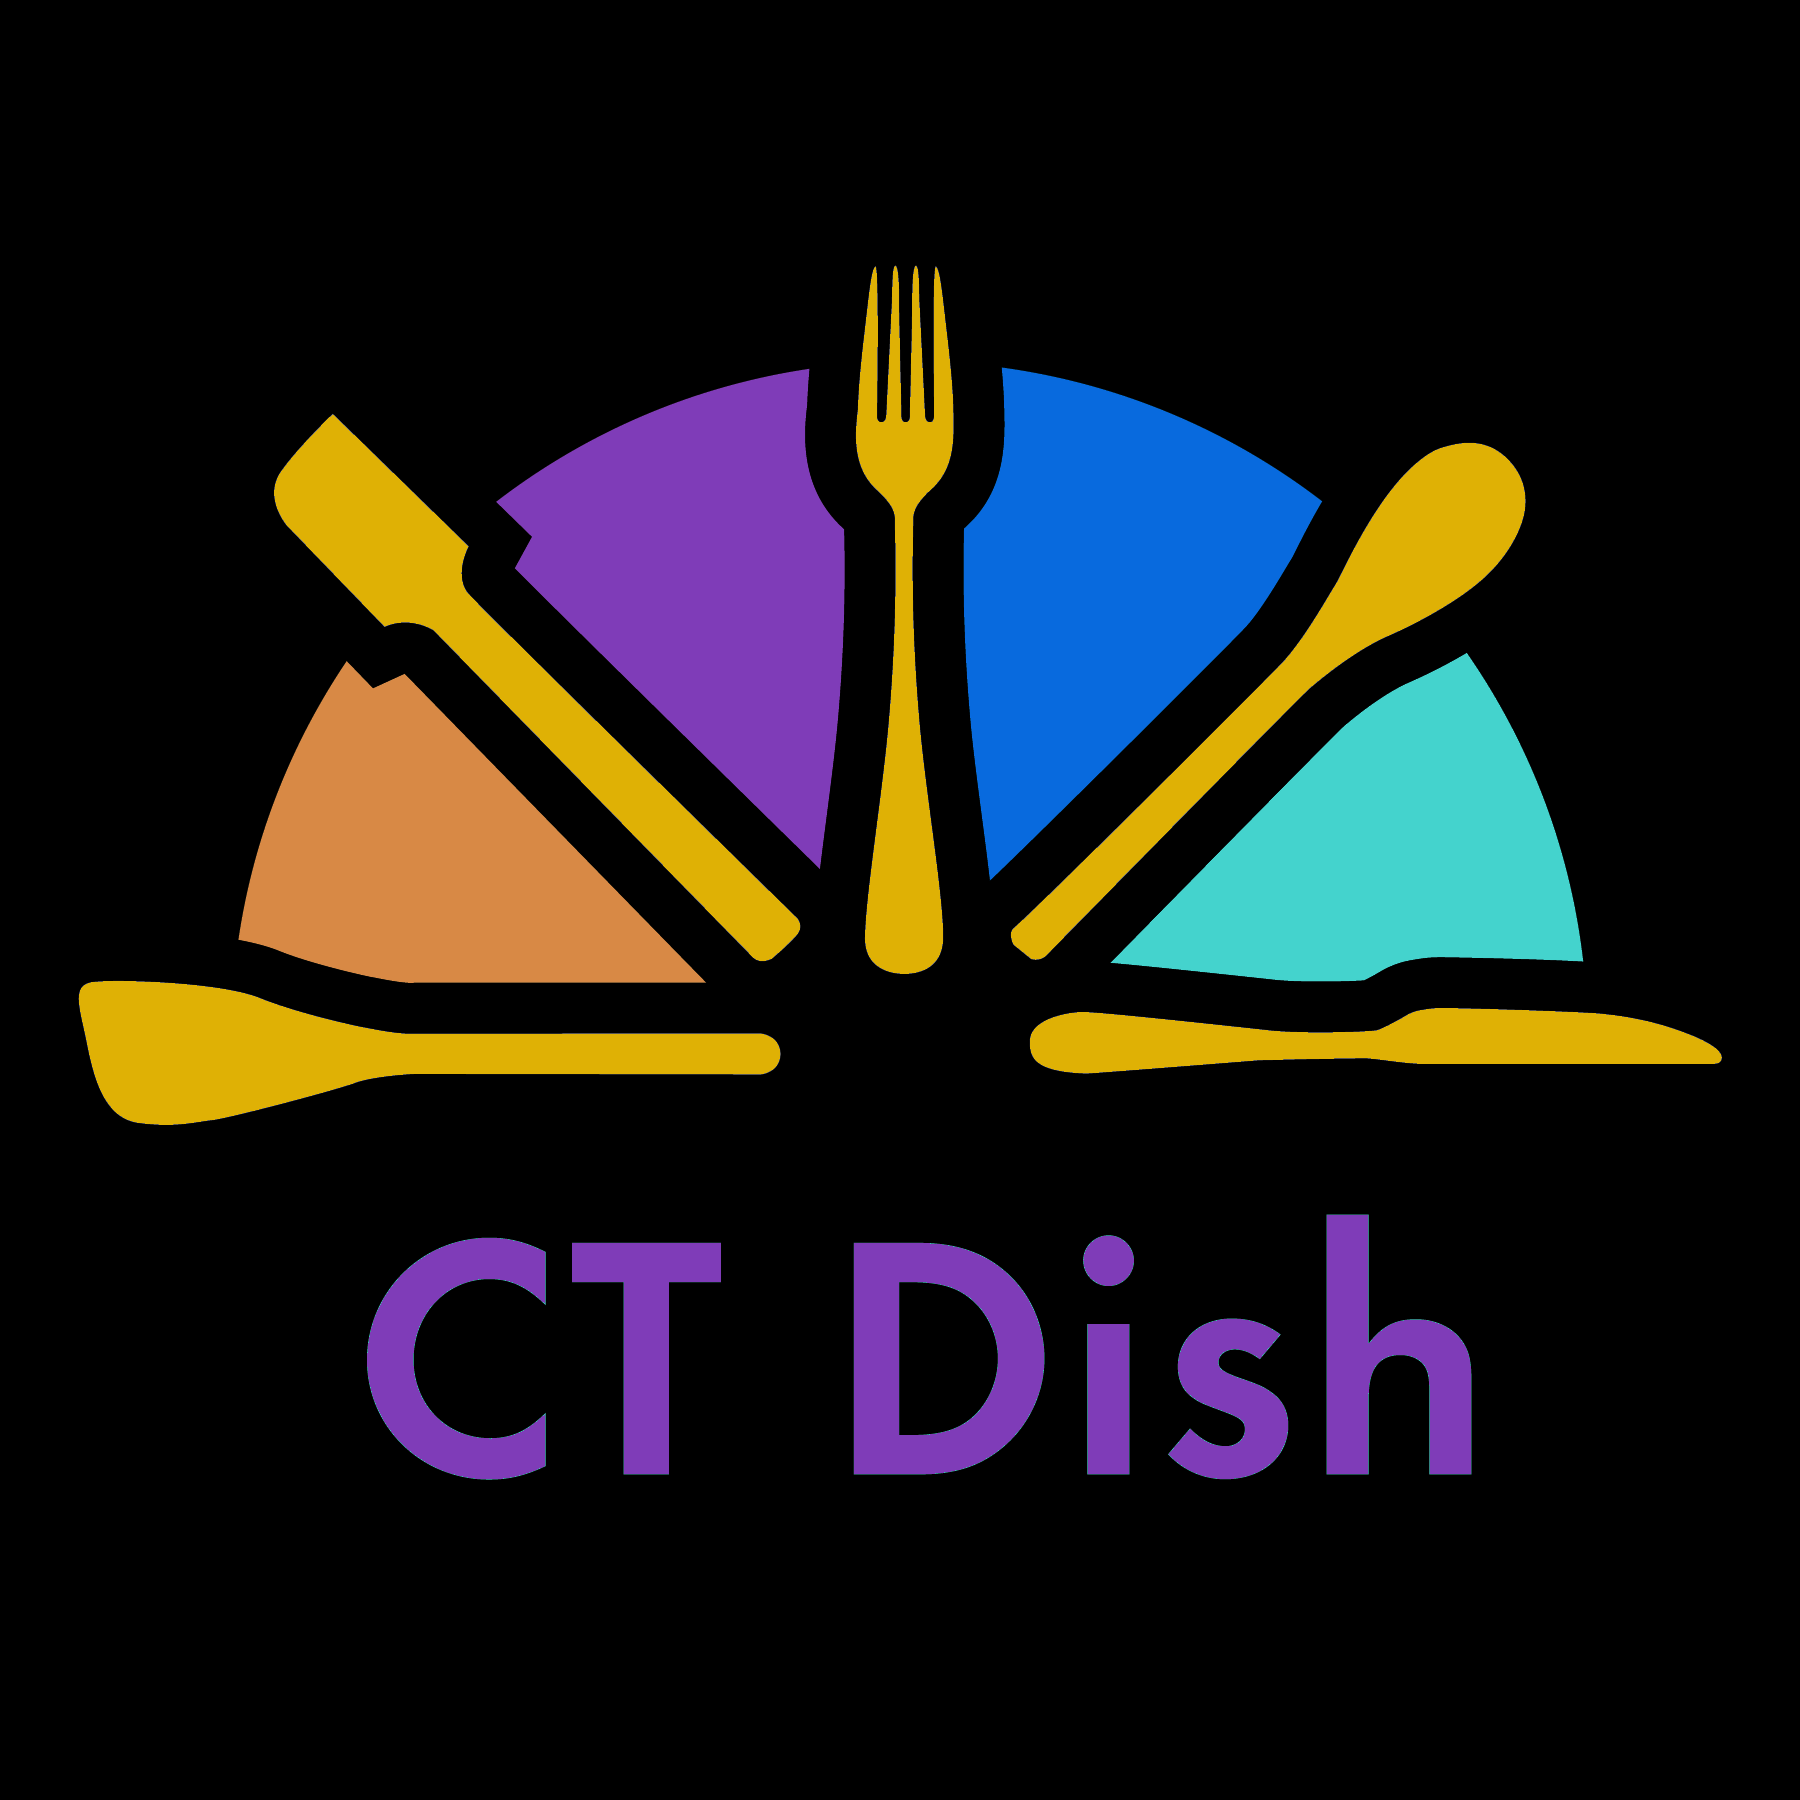 About CT Dish